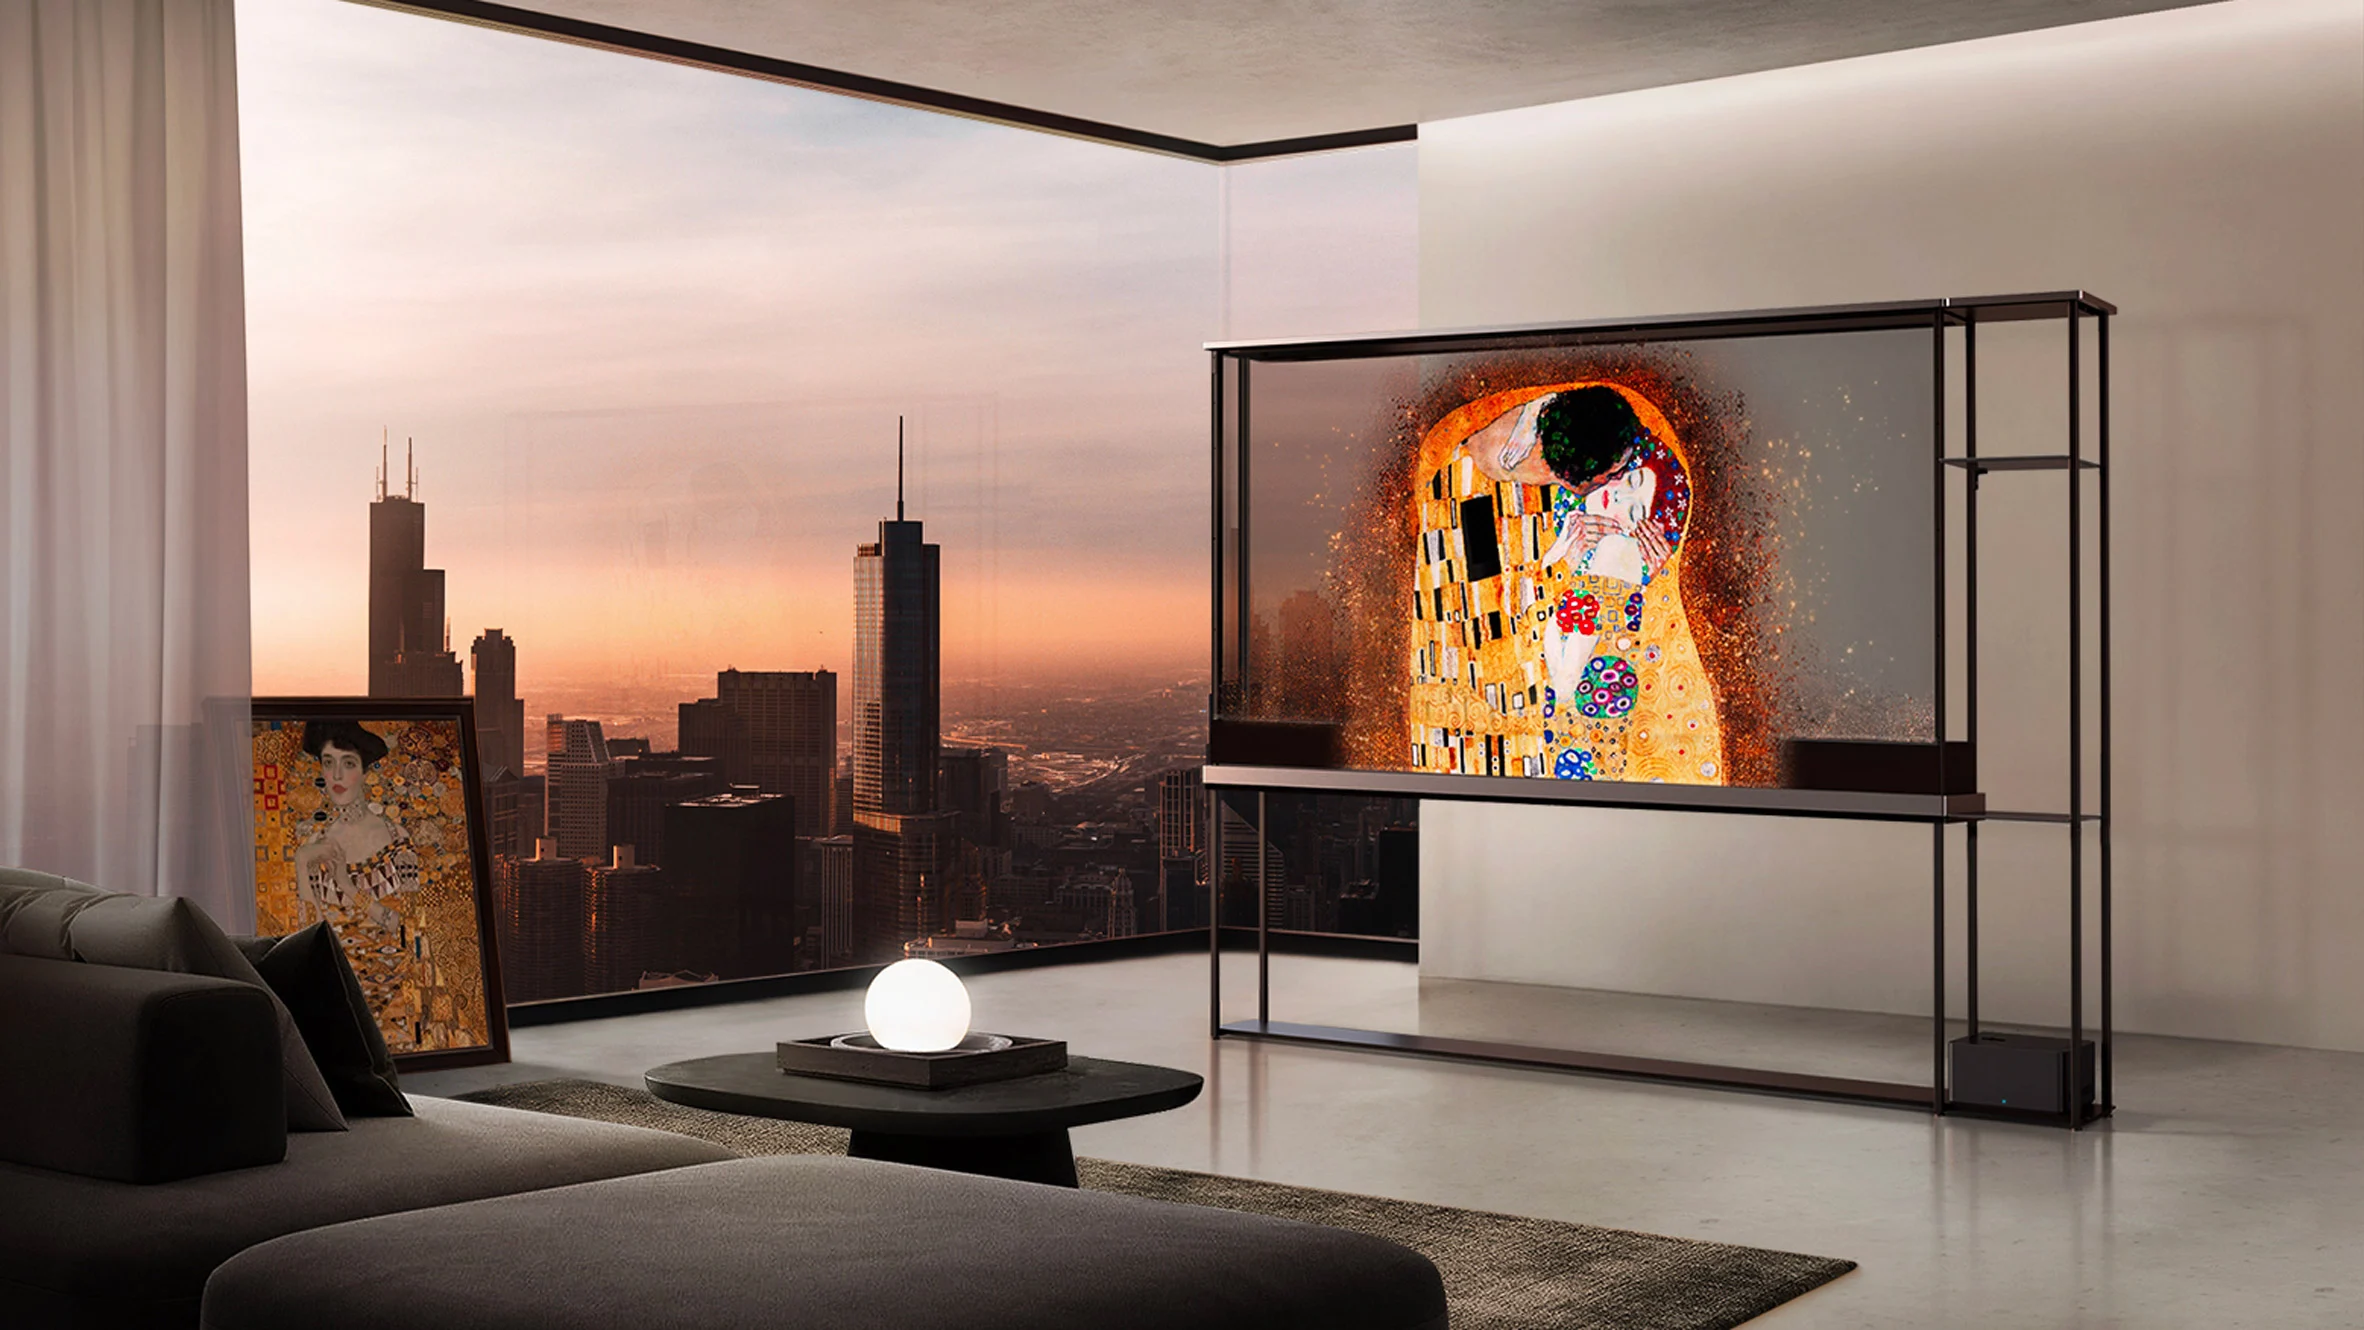 LG unveils first wireless OLED television